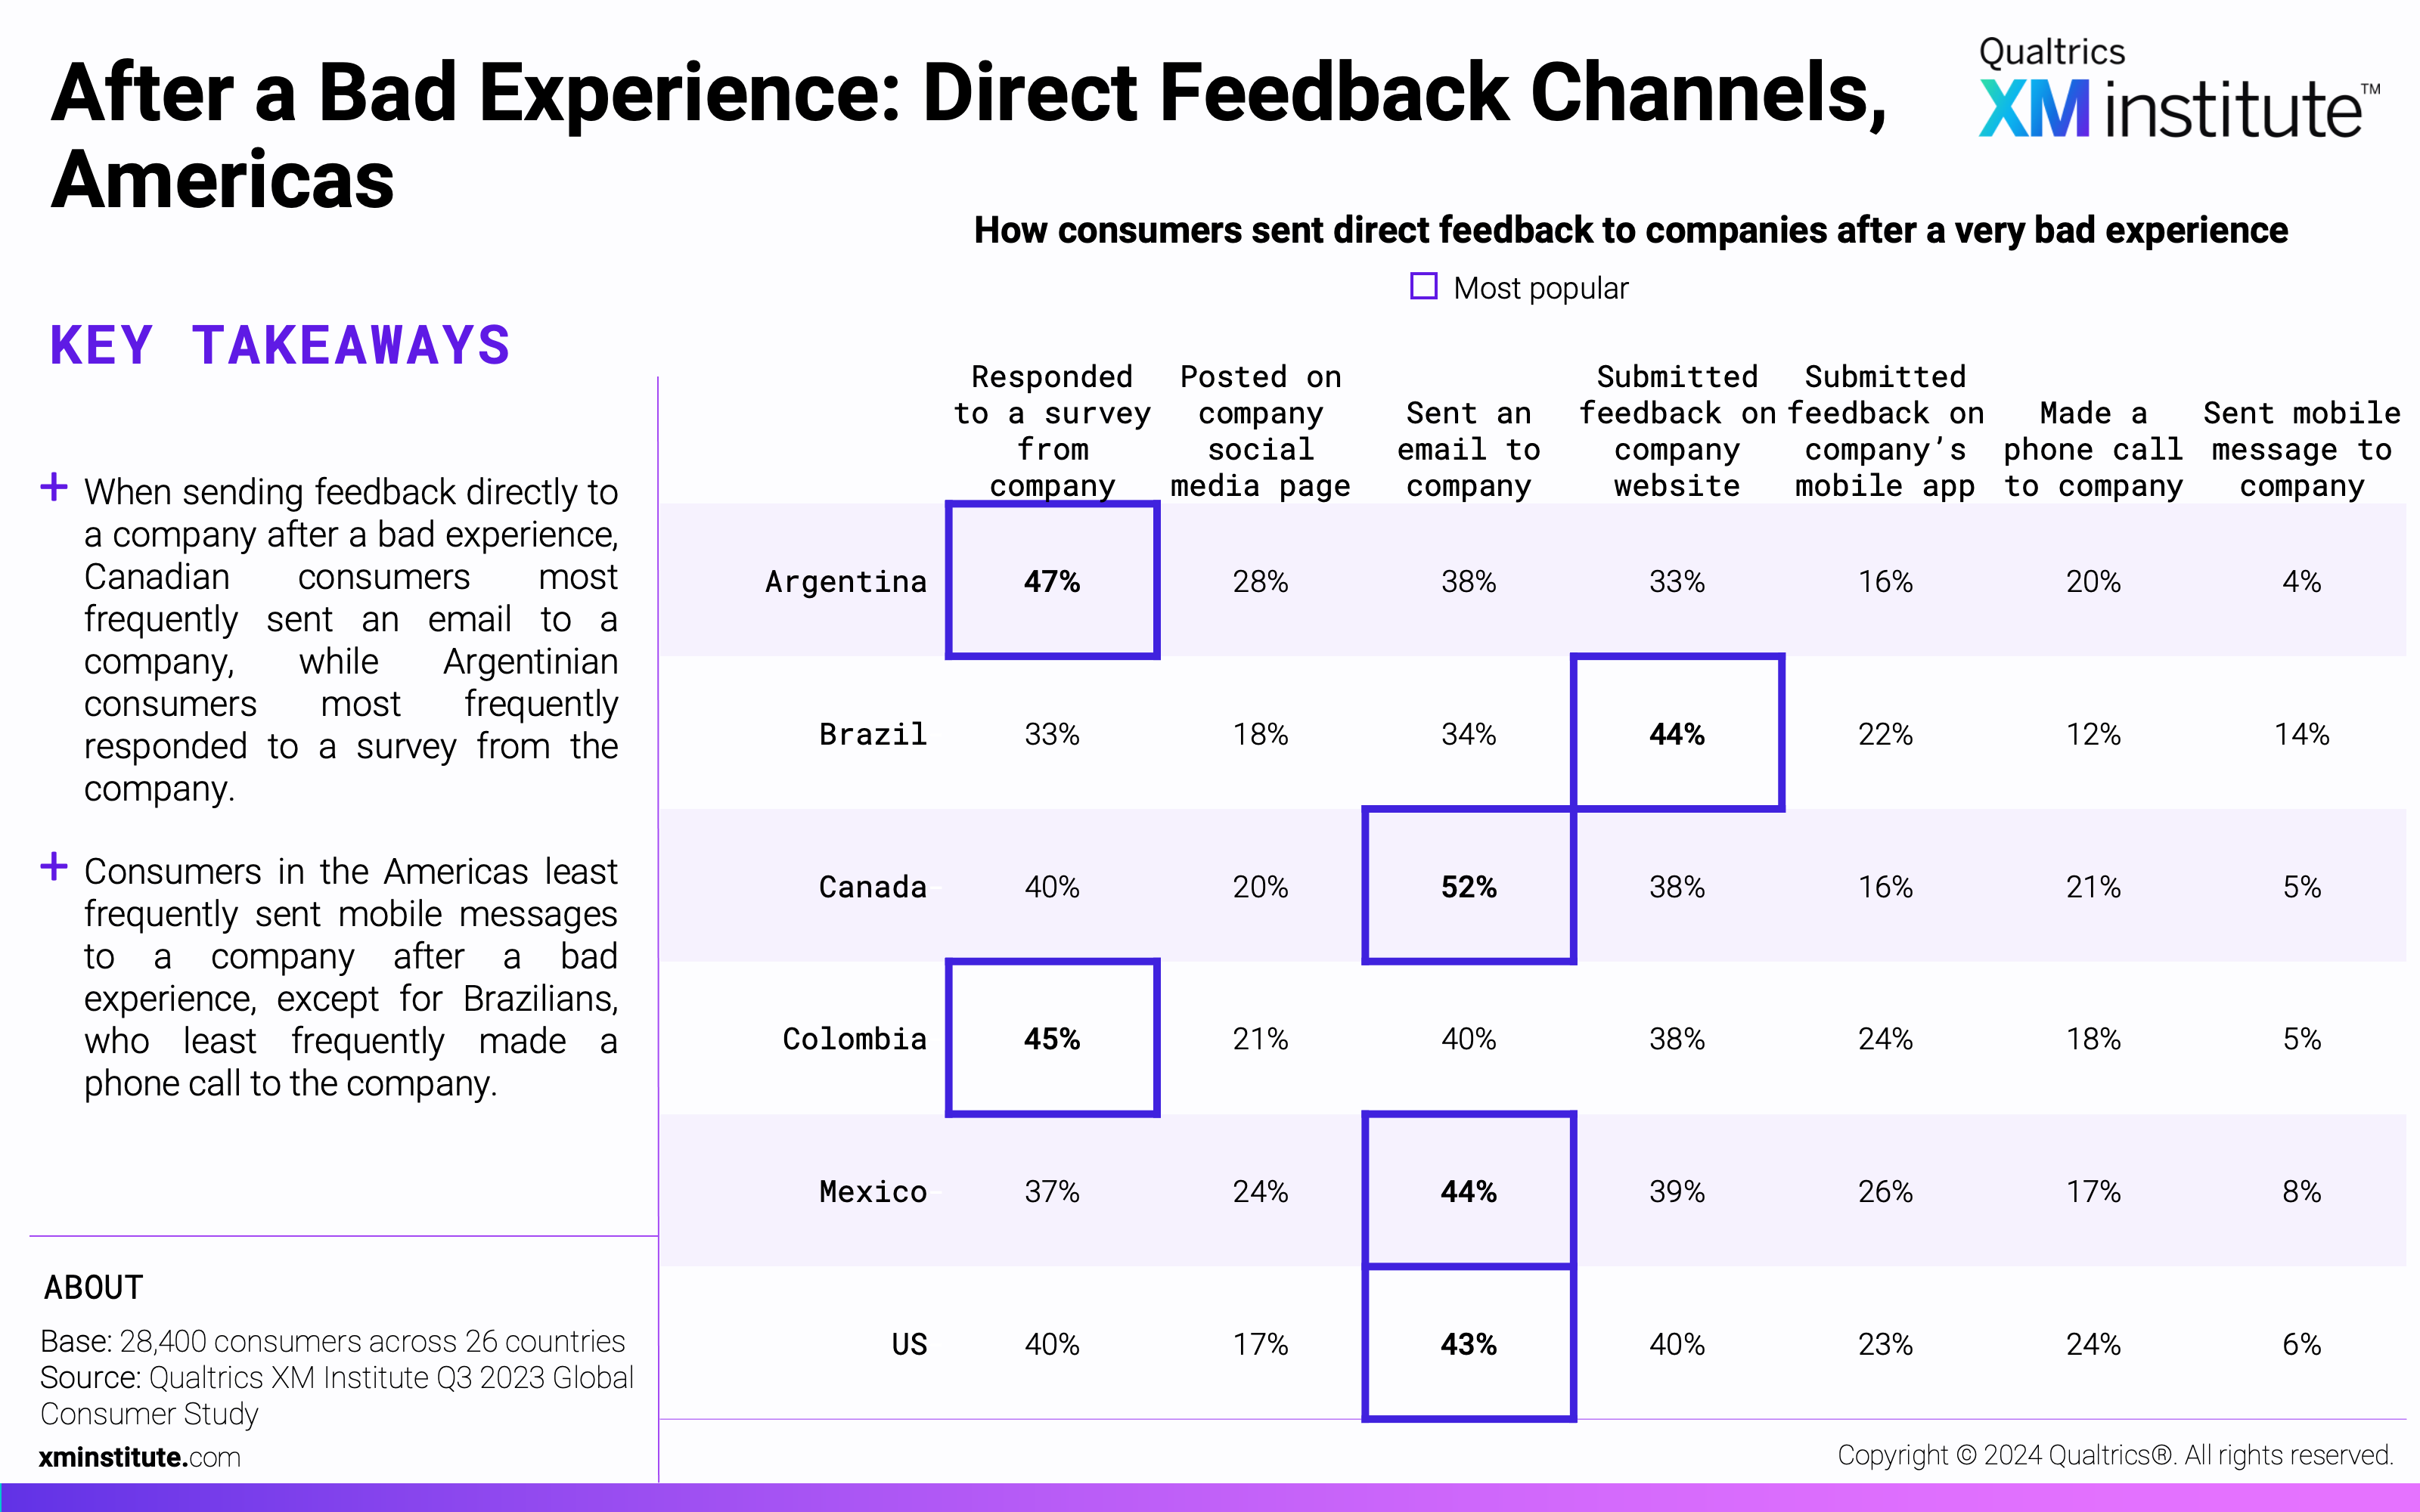 This table shows the percentage of consumers from each country that used each channel to send direct feedback to a company after a very bad experience.